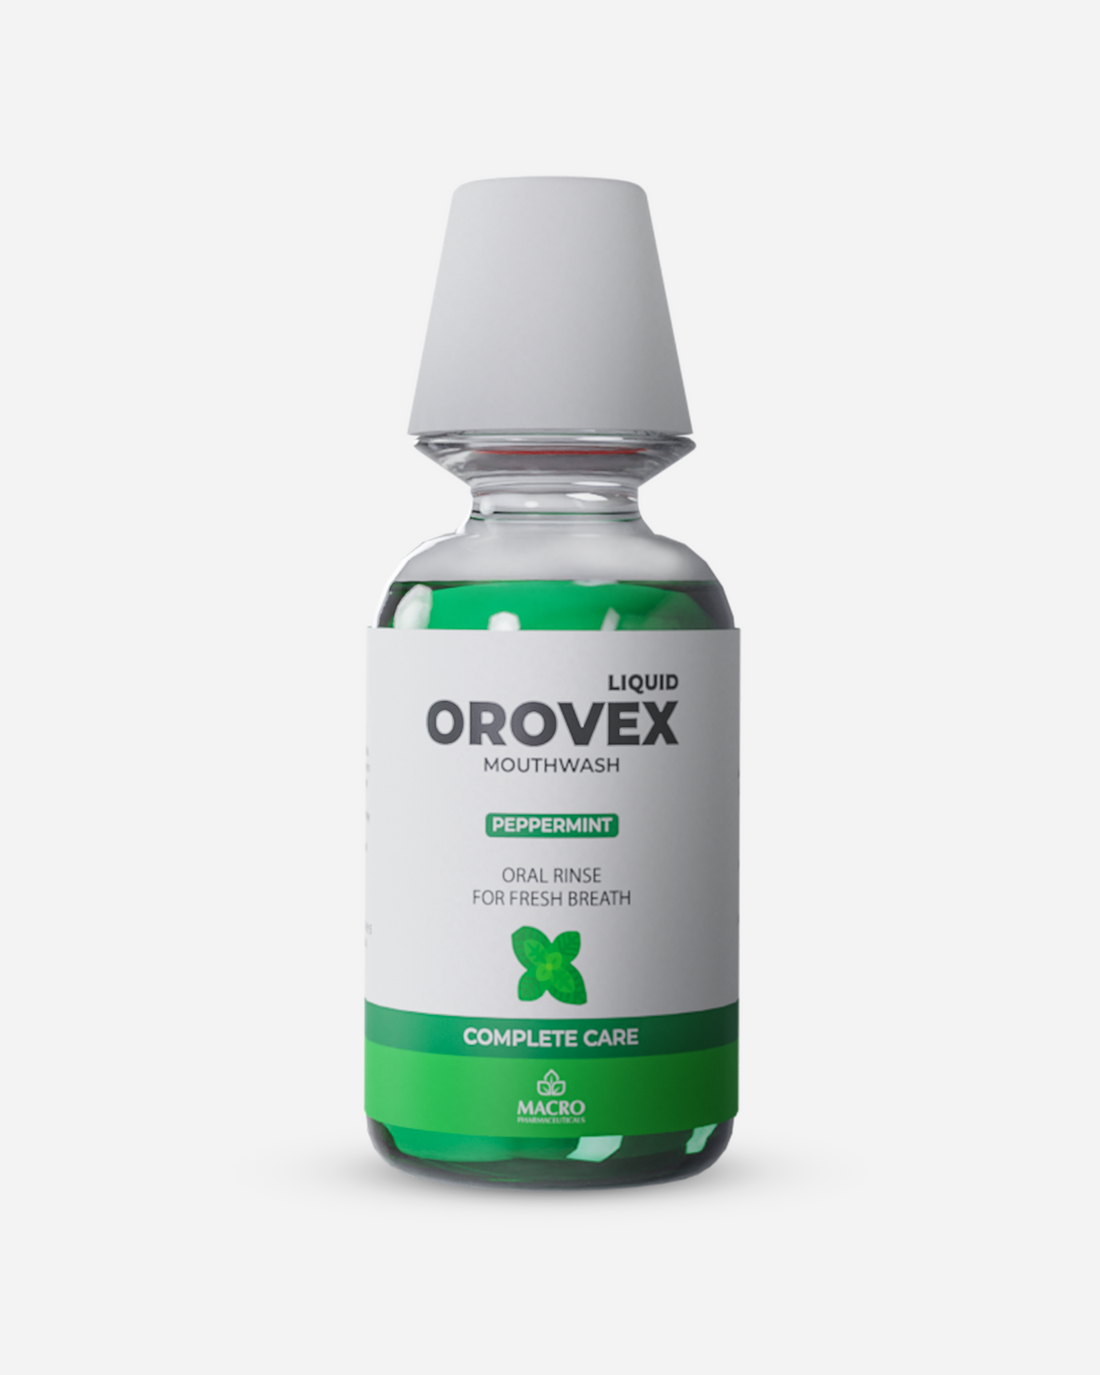 Orovex Peppermint